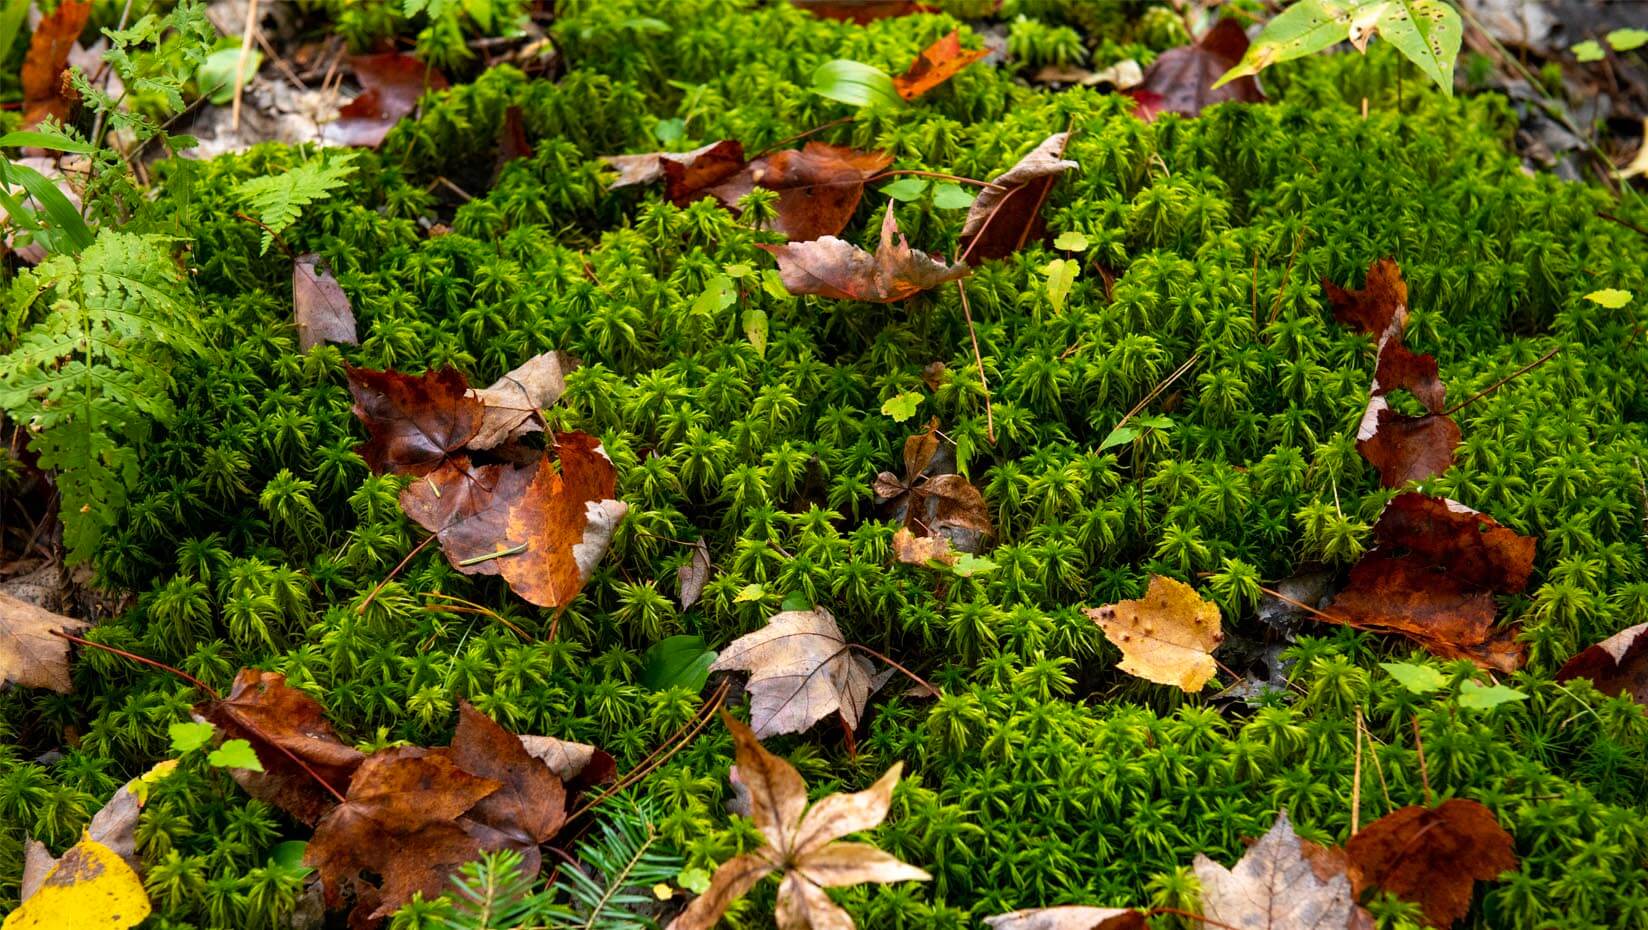 Leaves and plants on the forest floor